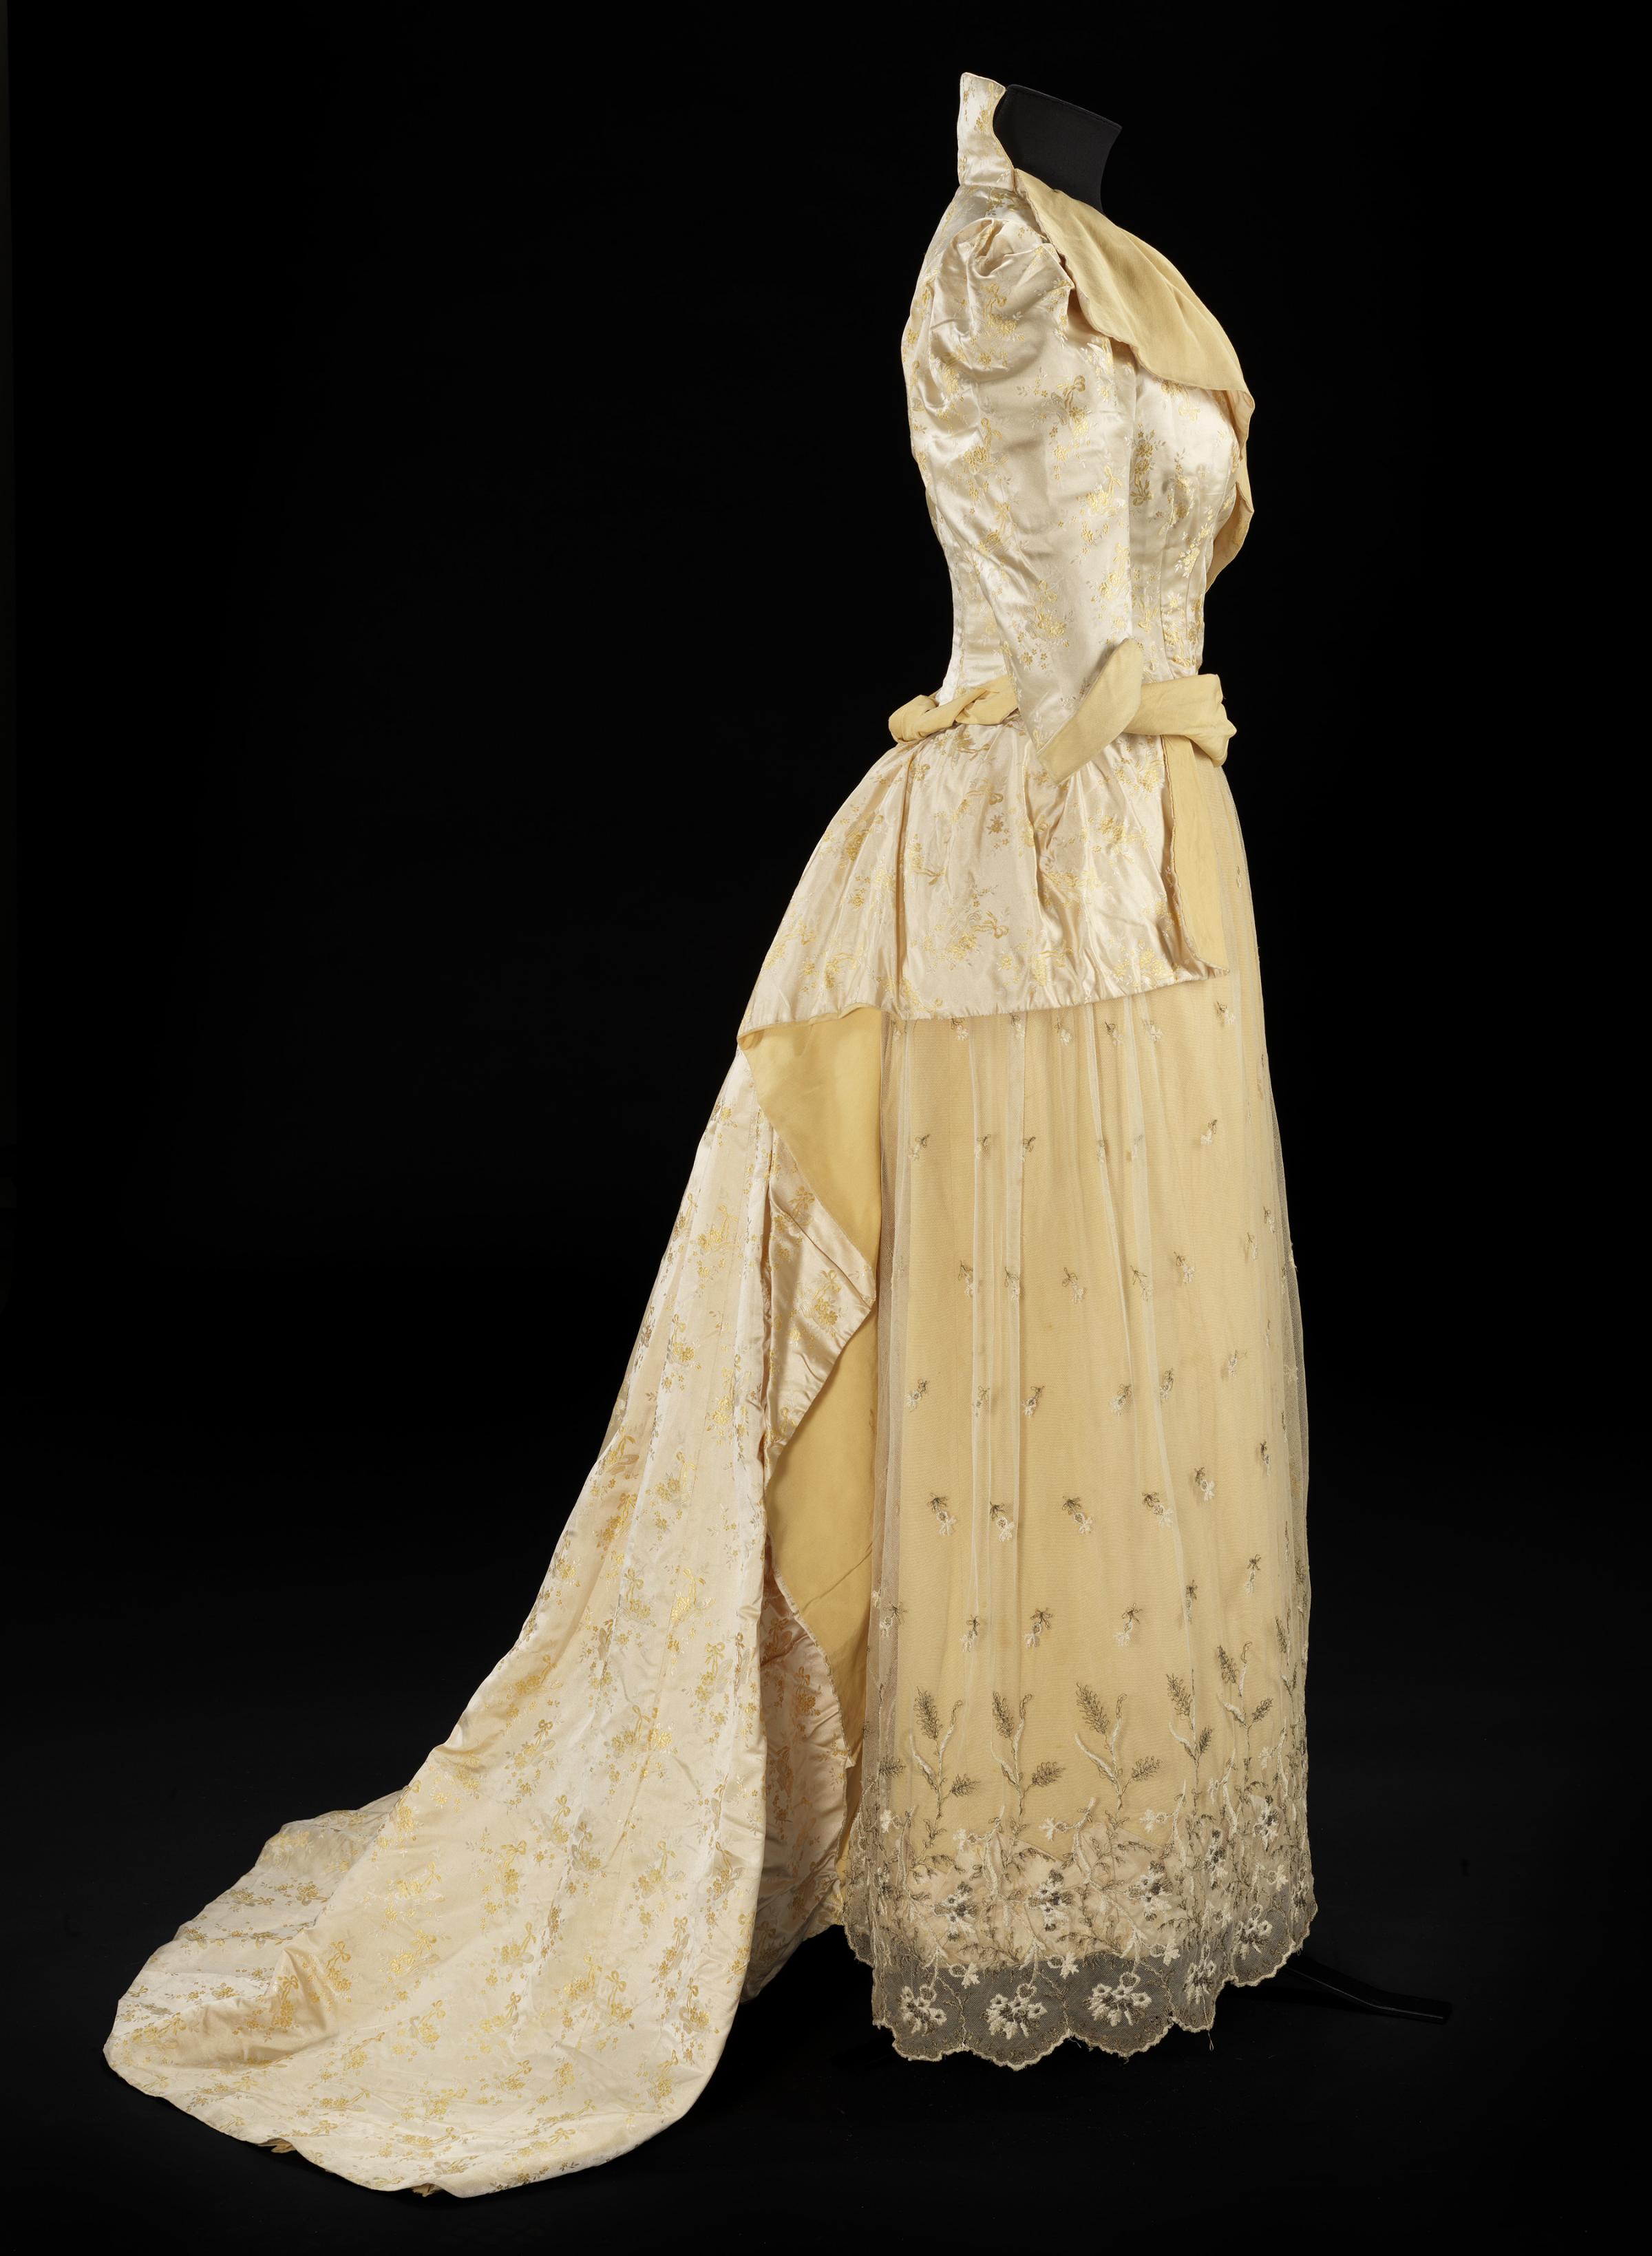 The golden-yellow dress. (c) CSG CIC Glasgow Museums 